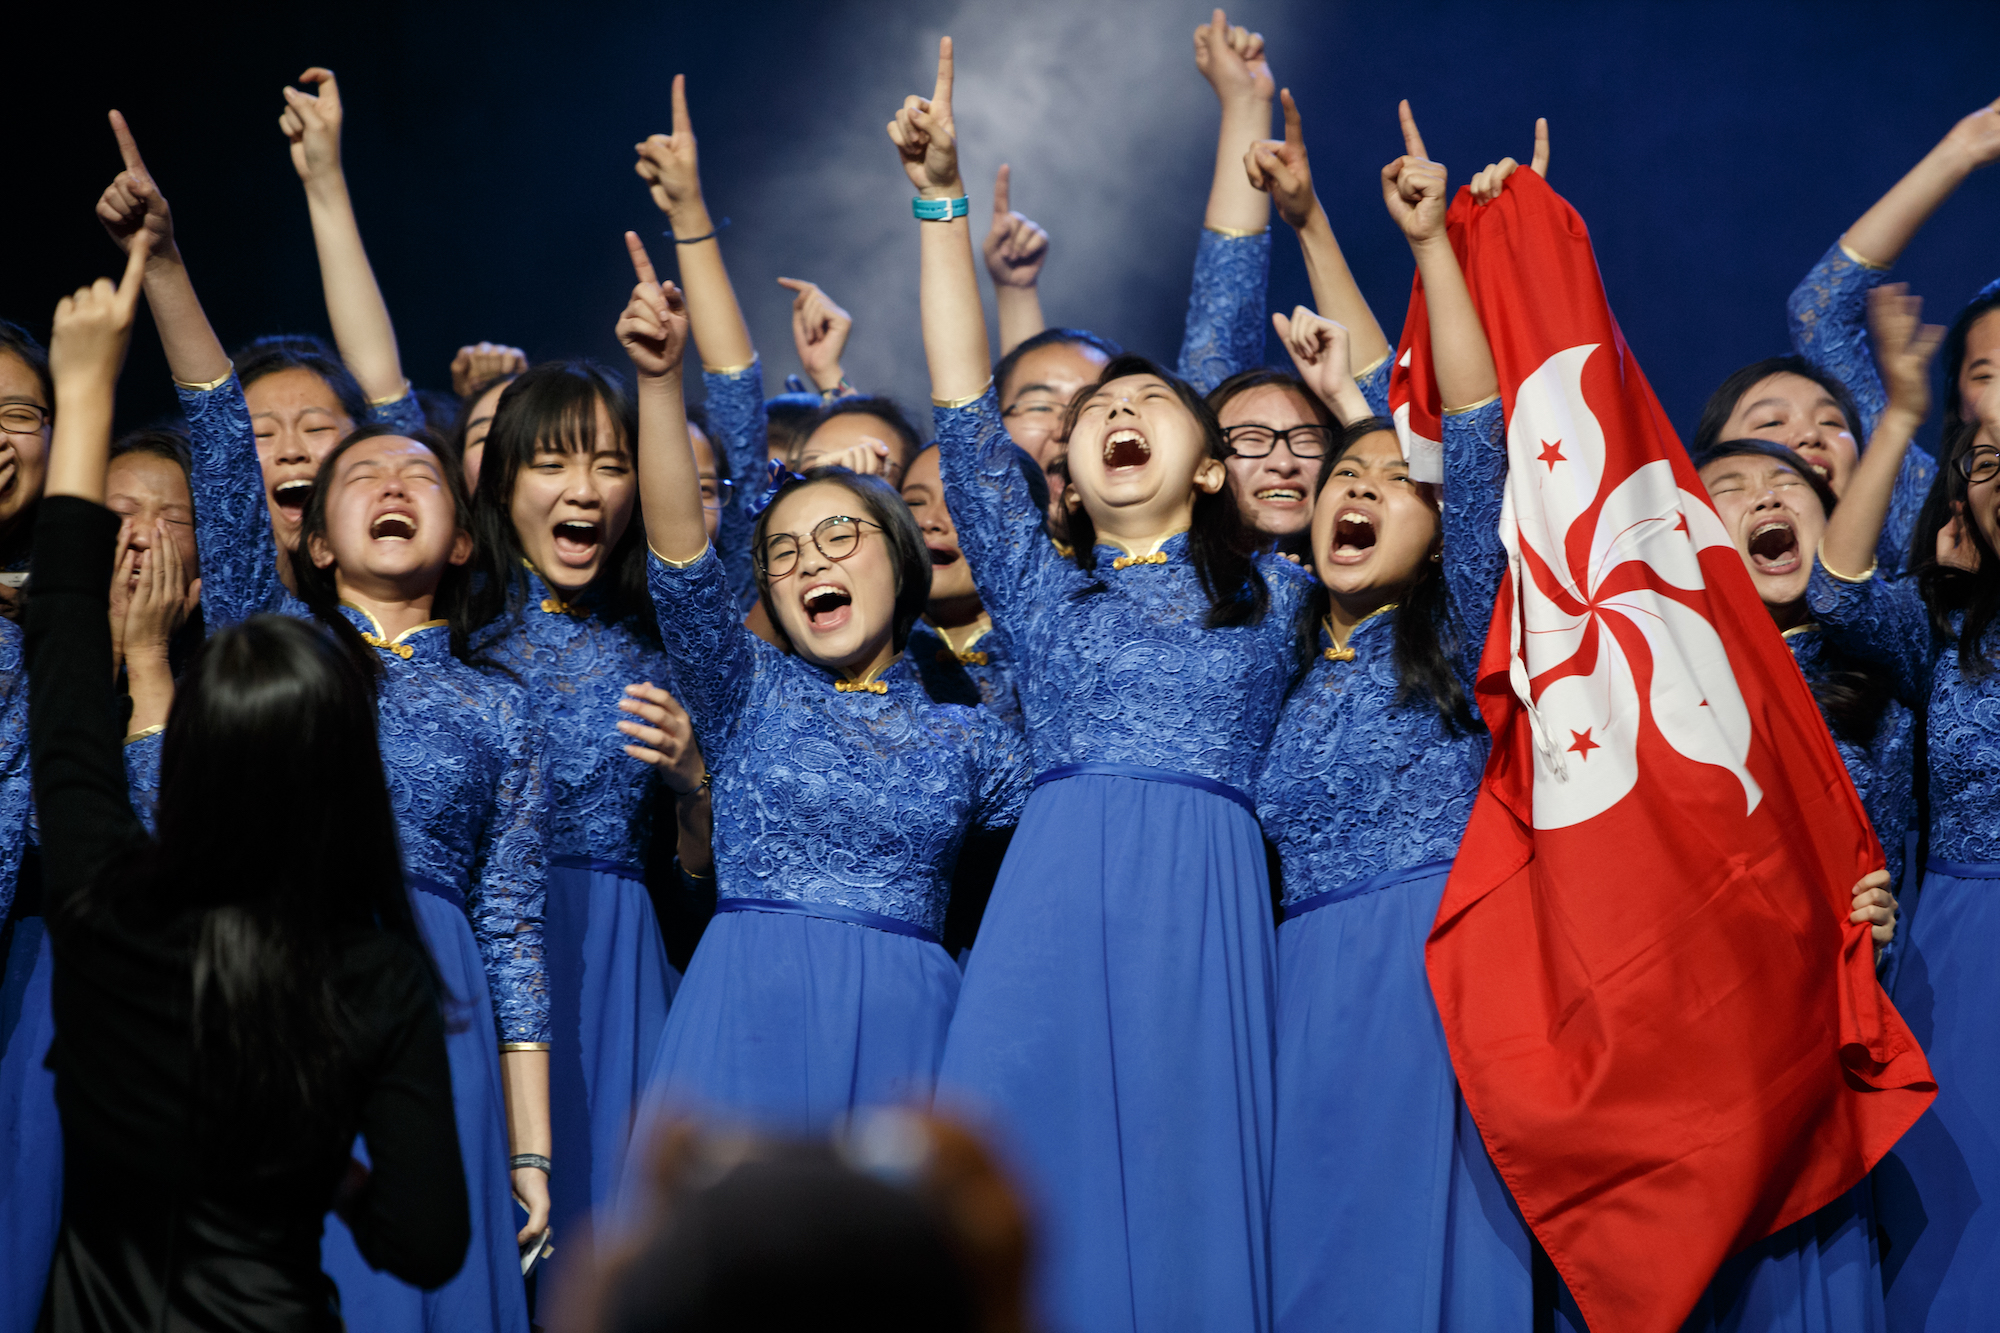 World Choir Games - The worlds biggest choir competition